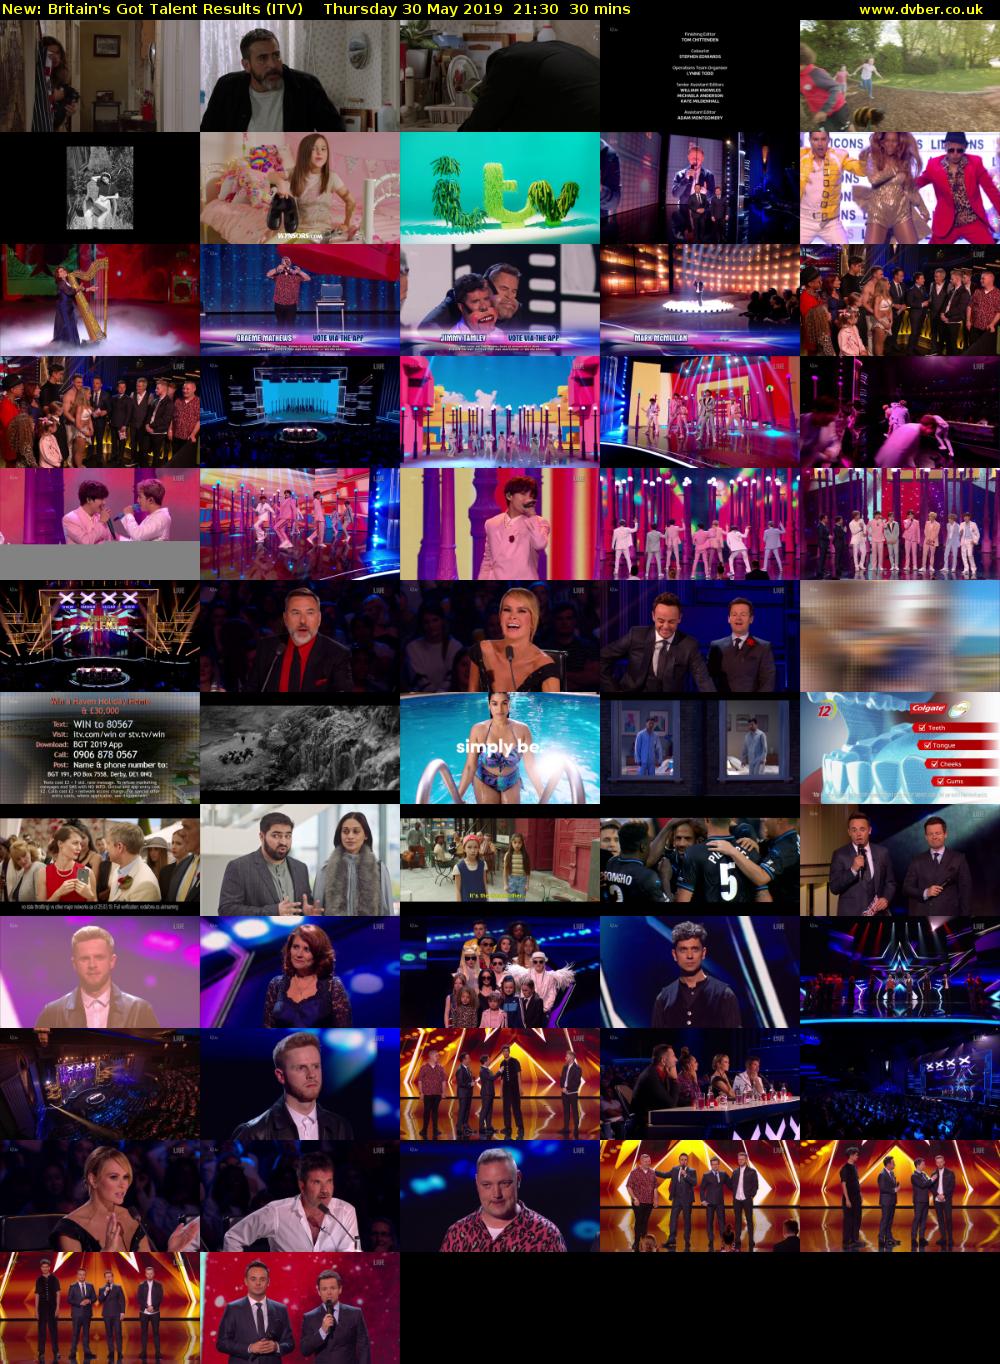 Britain's Got Talent Results (ITV) Thursday 30 May 2019 21:30 - 22:00